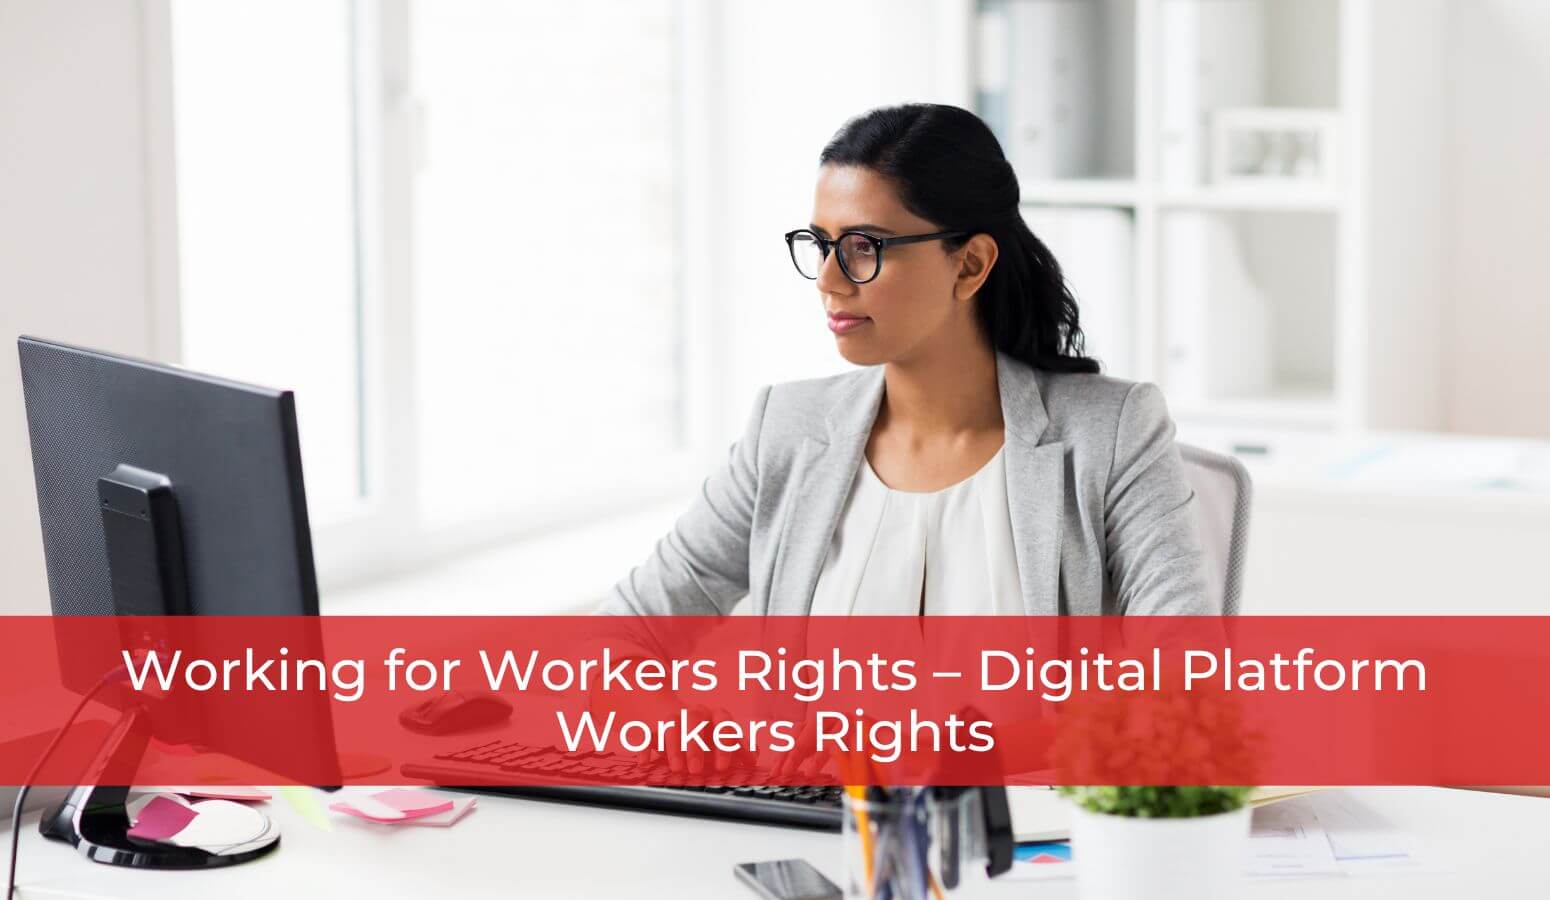 Featured image for “Working for Workers Rights – Digital Platform Workers Rights”